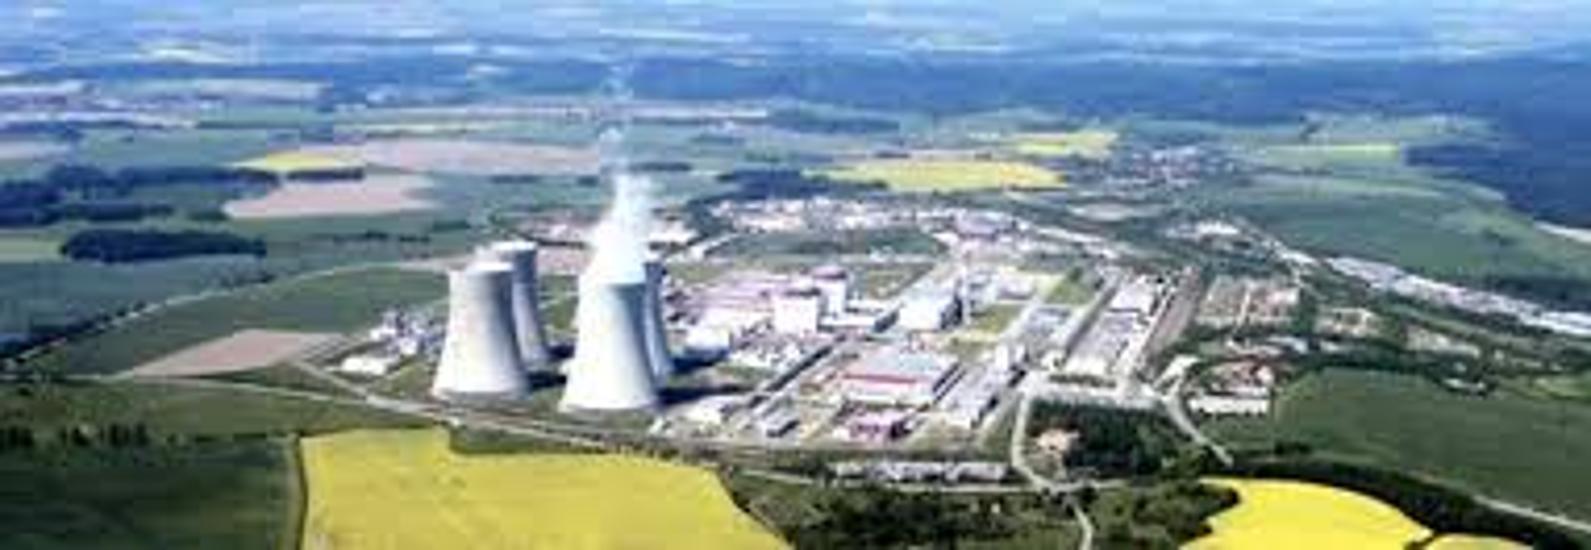 Majority Supports Paks Nuclear Power Upgrade In Hungary